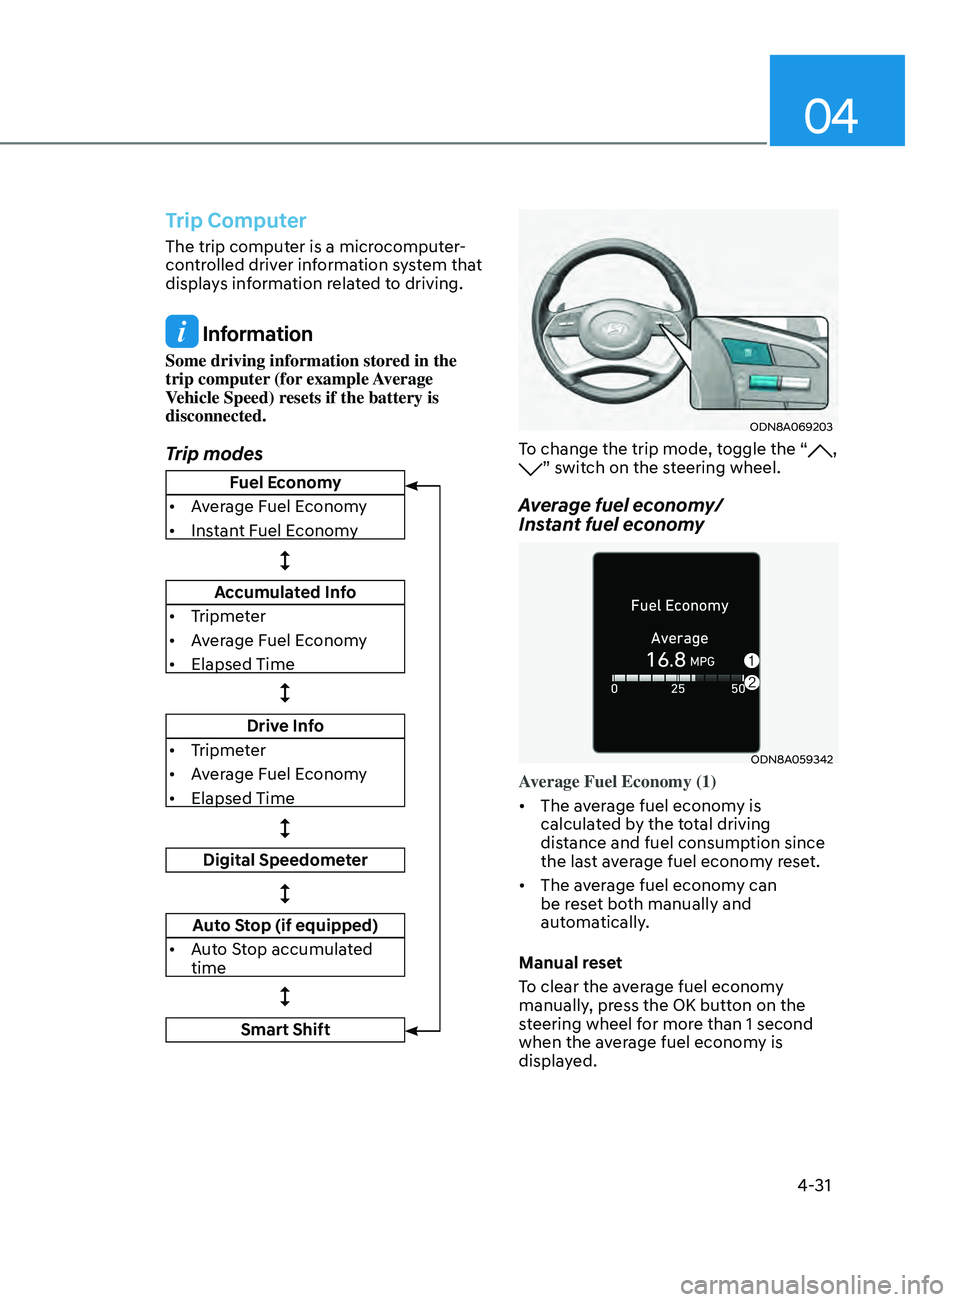 HYUNDAI SONATA 2021  Owners Manual 04
4-31
Trip Computer
The trip computer is a microcomputer-
controlled driver information system that 
displays information related to driving.
 Information
Some driving information stored in the 
tri